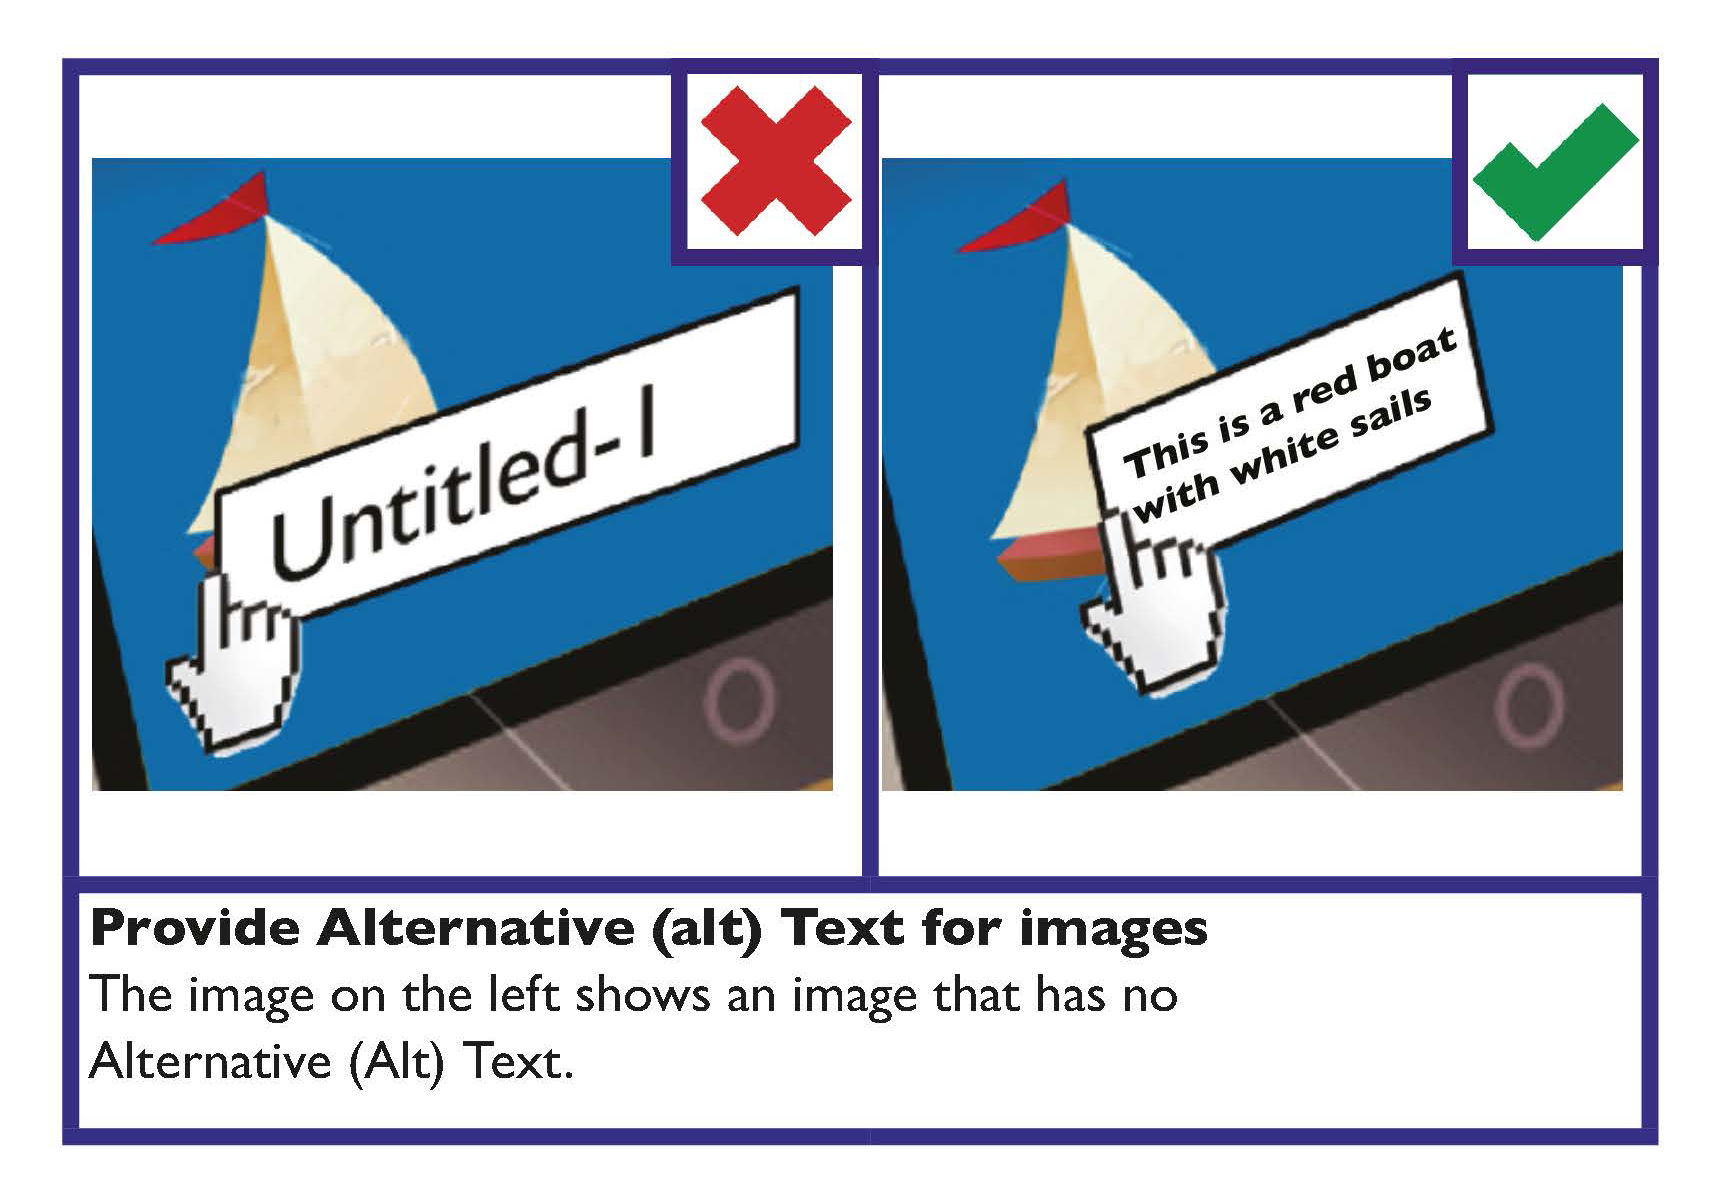 Two images, one image has alt text and one image does not have alternative text. Provide alternative text for images.